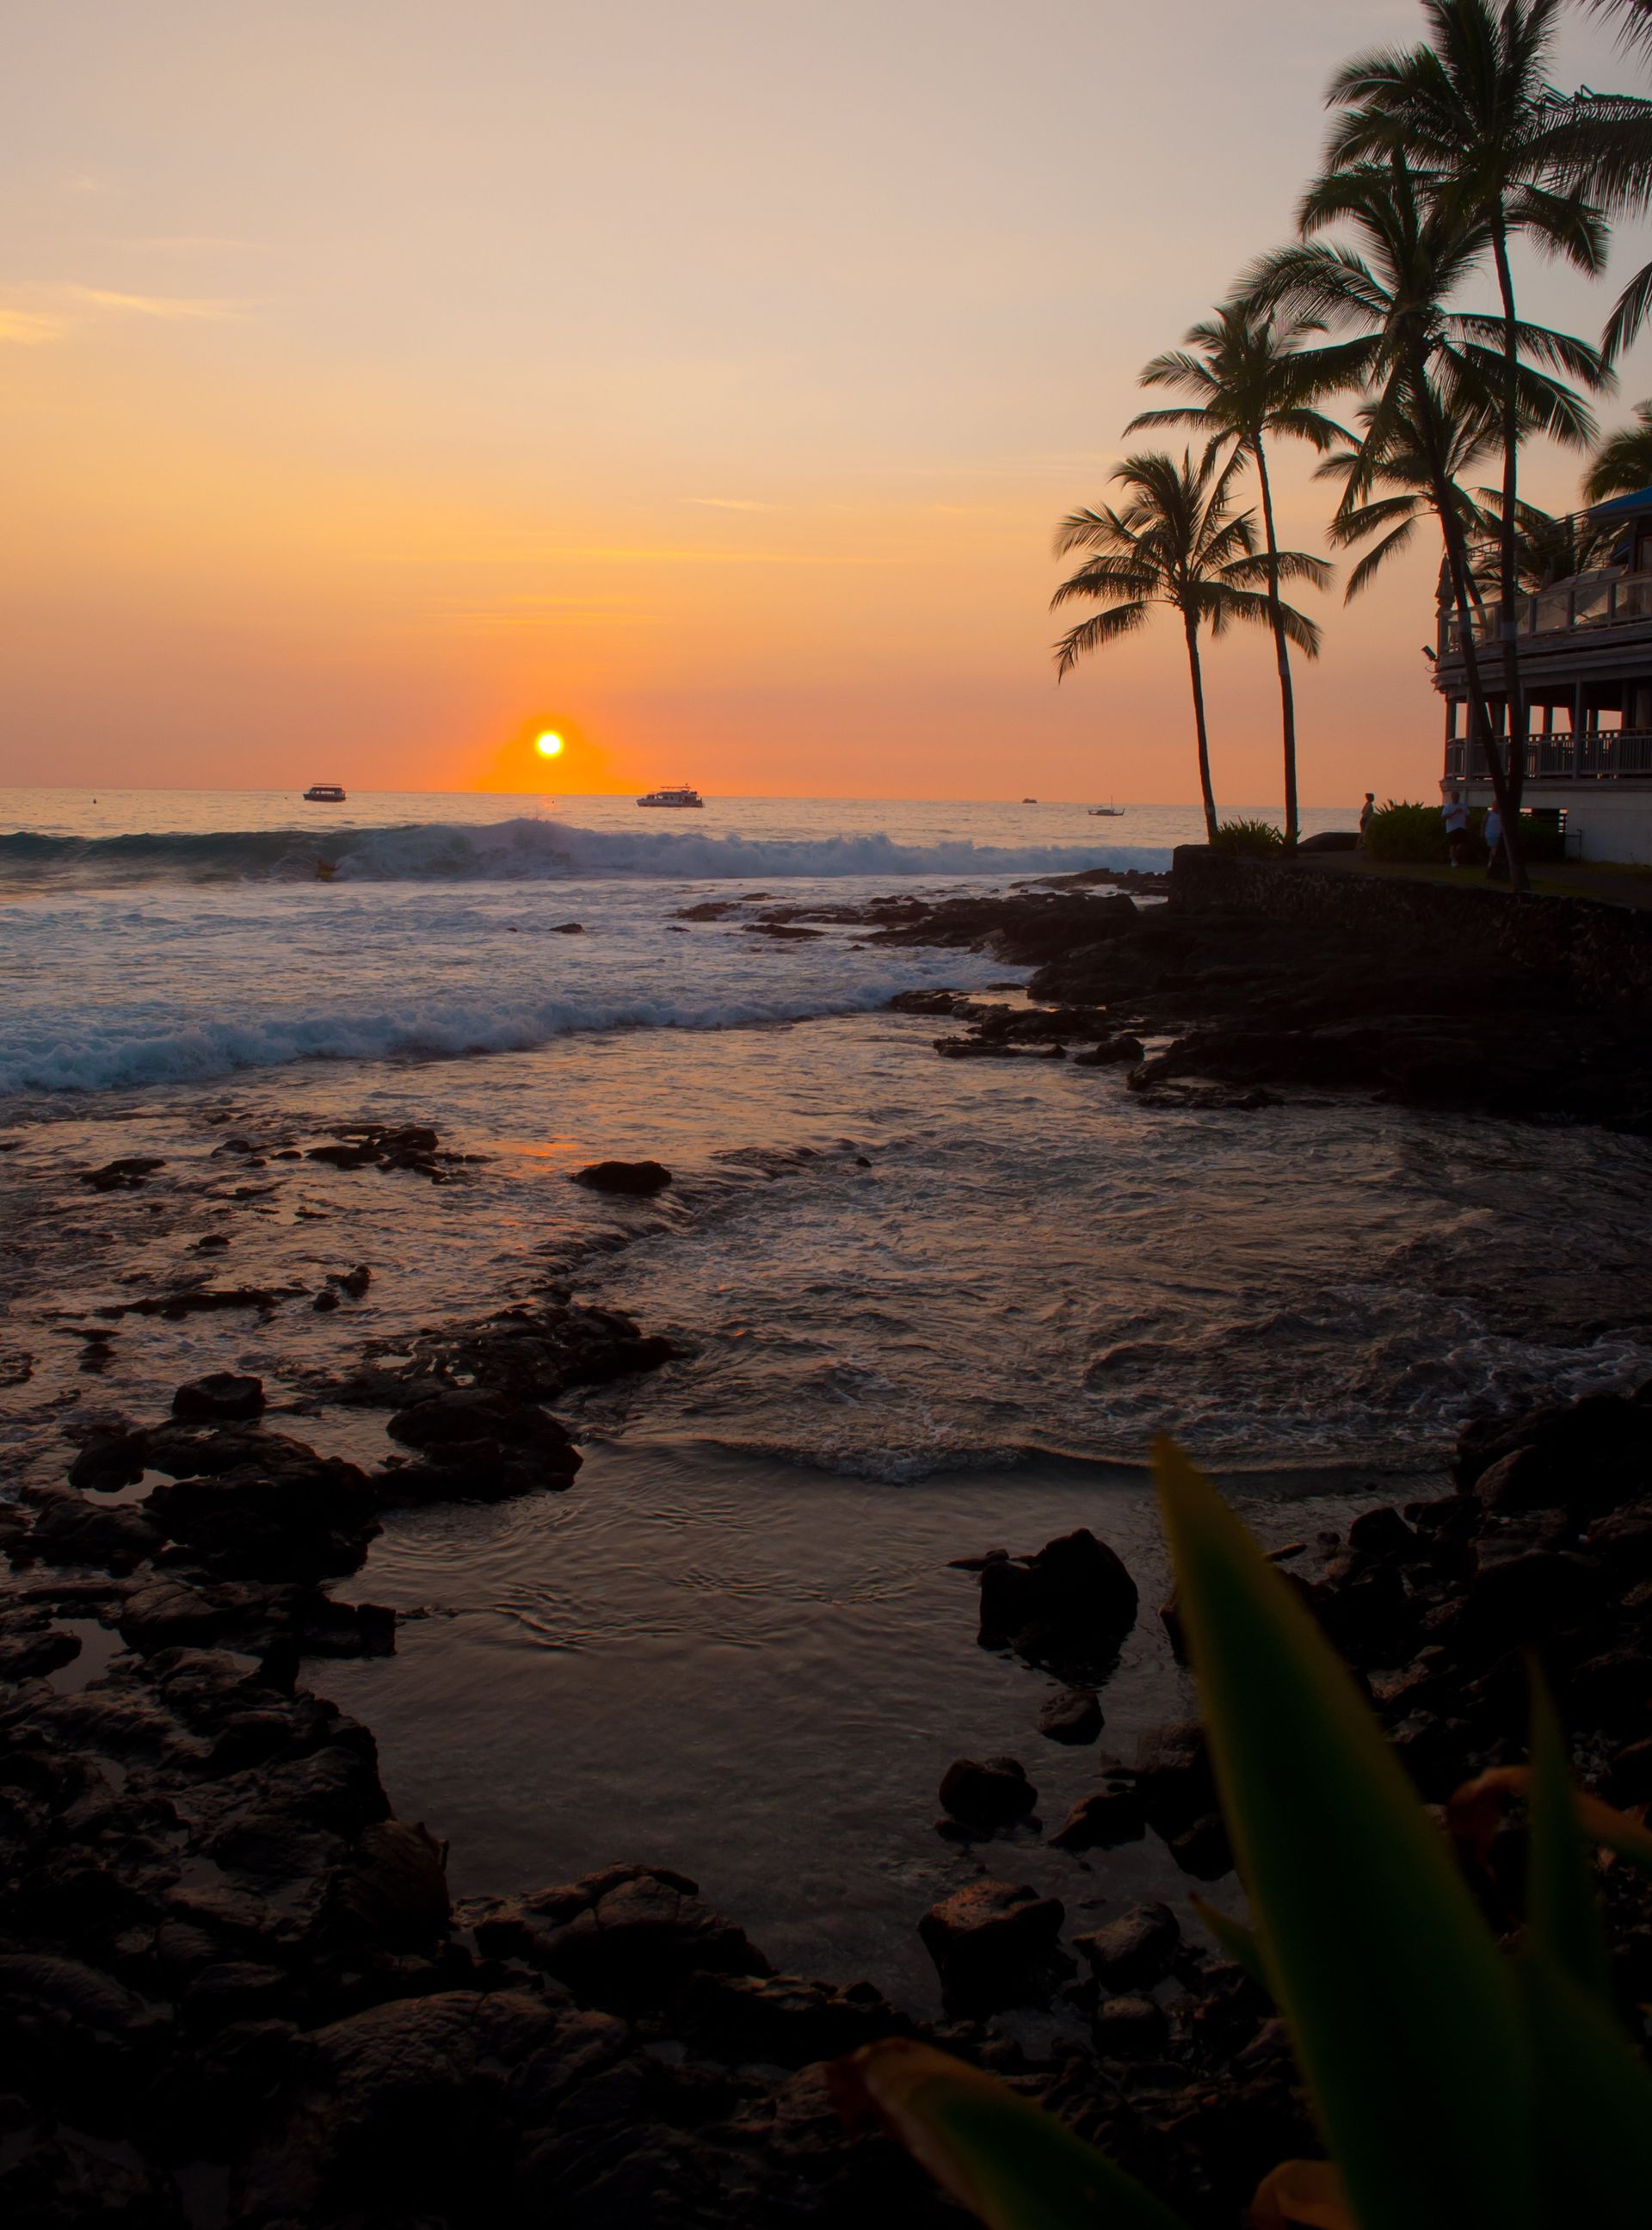 The sun sets over the ocean, with a view of the shore and palm trees.